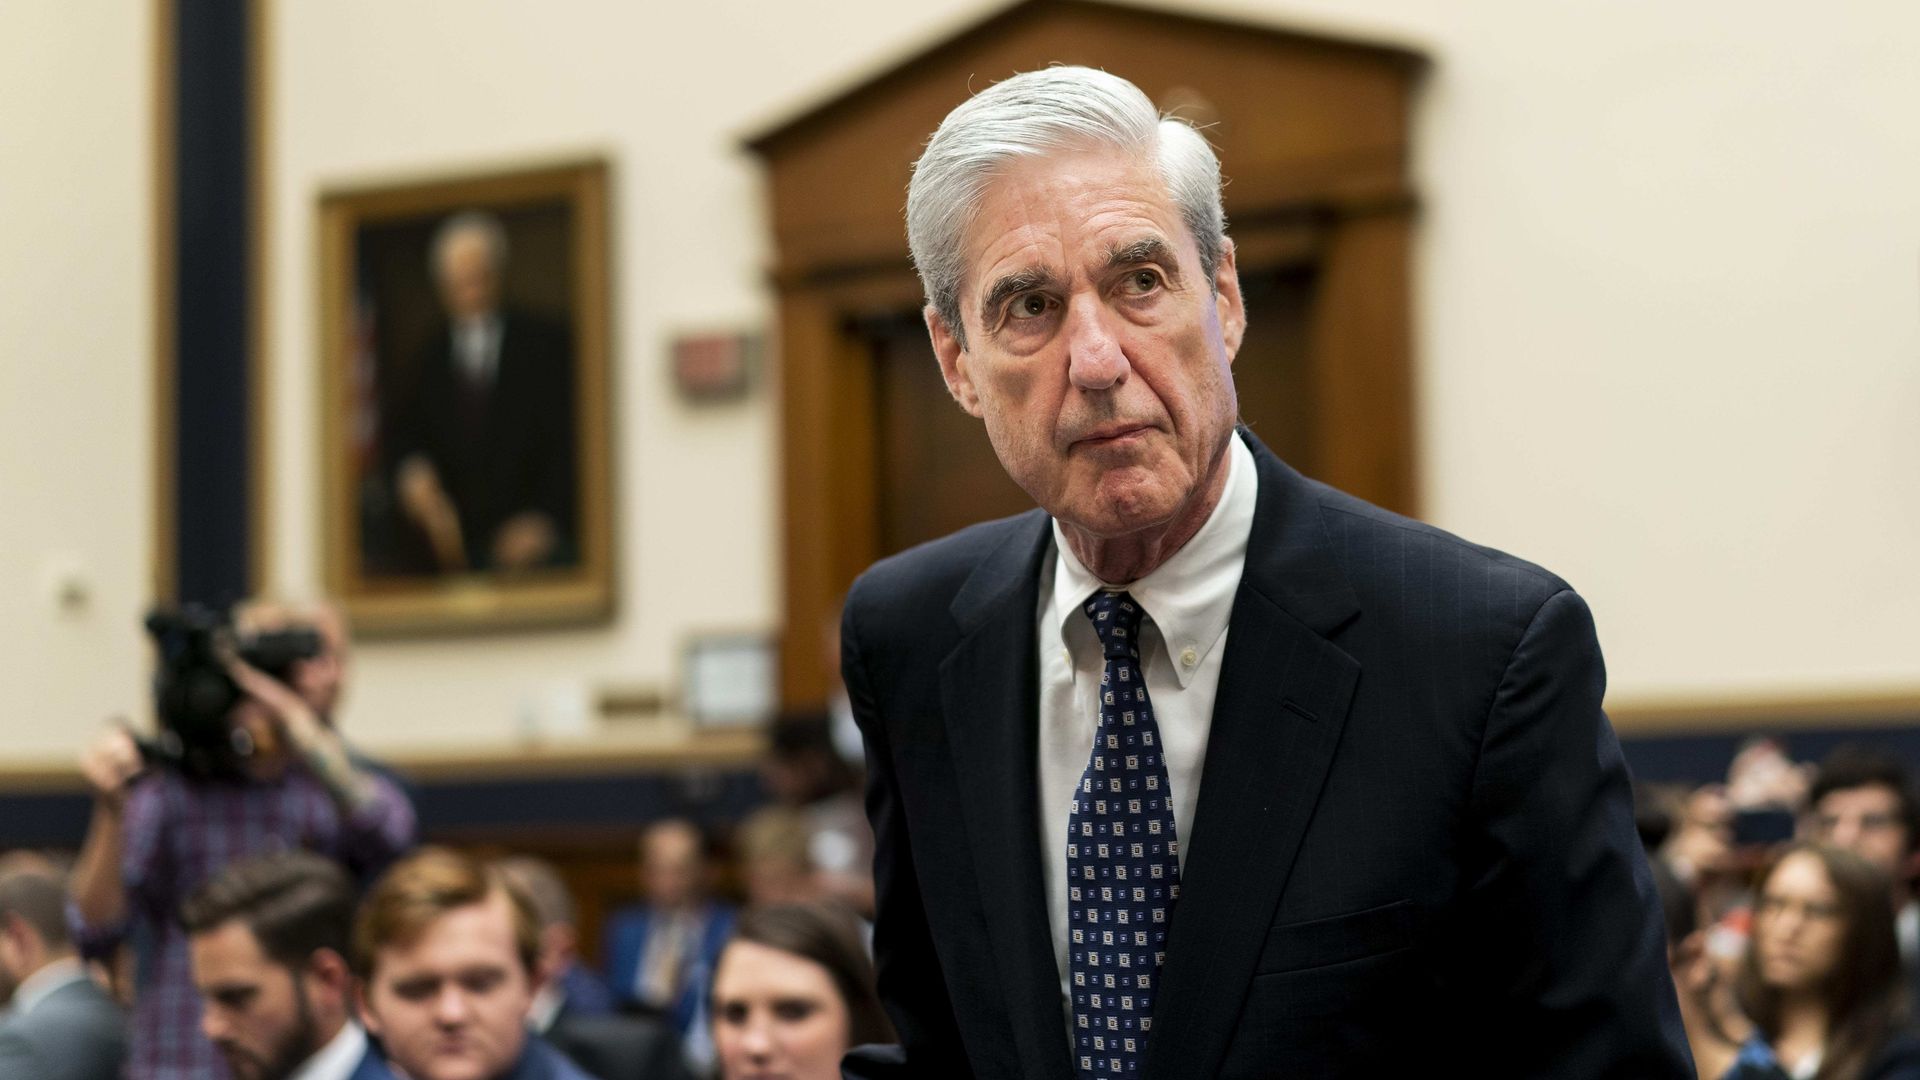 Former Special Counsel Robert Mueller testifies before the House Permanent Select Committee on Intelligence on Capitol Hill on Wednesday July 24, 2019